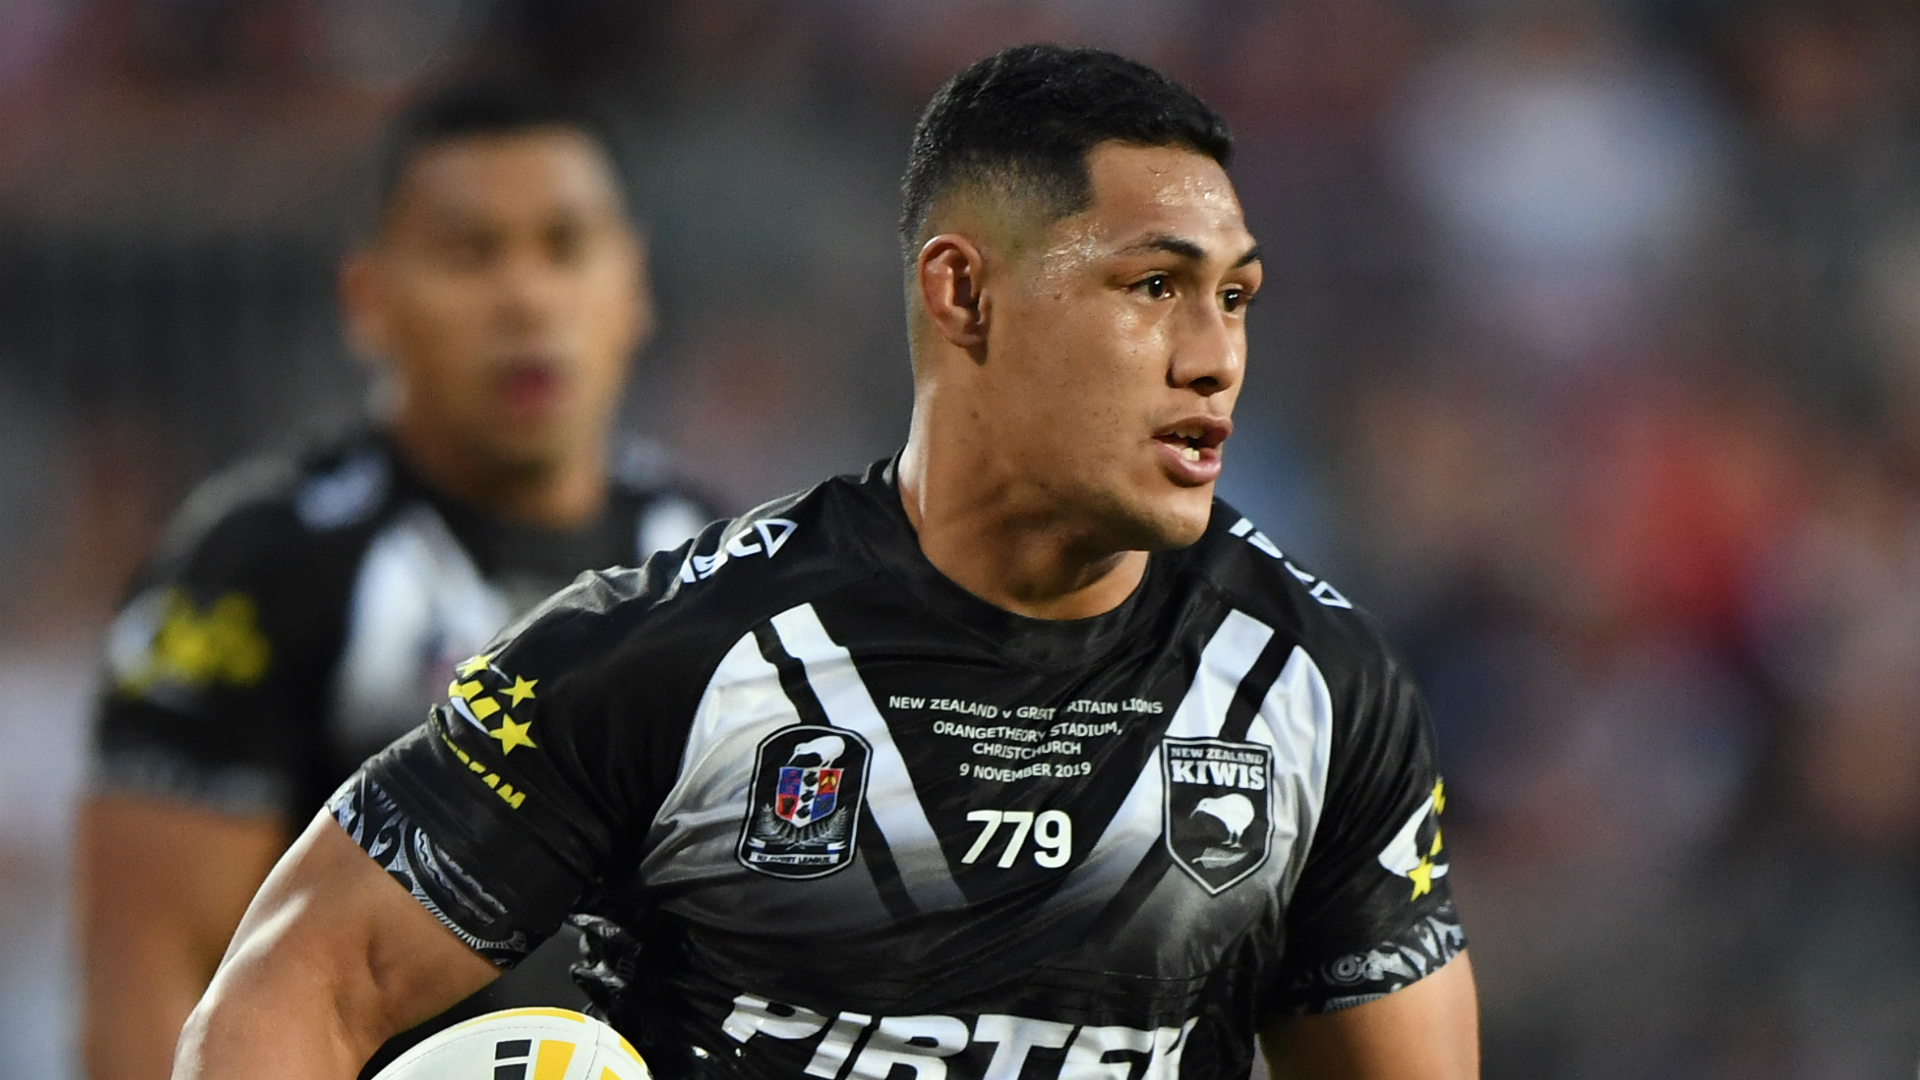 New Zealand star Roger Tuivasa-Sheck capped a fine year on the international stage by taking home the Golden Boot prize.